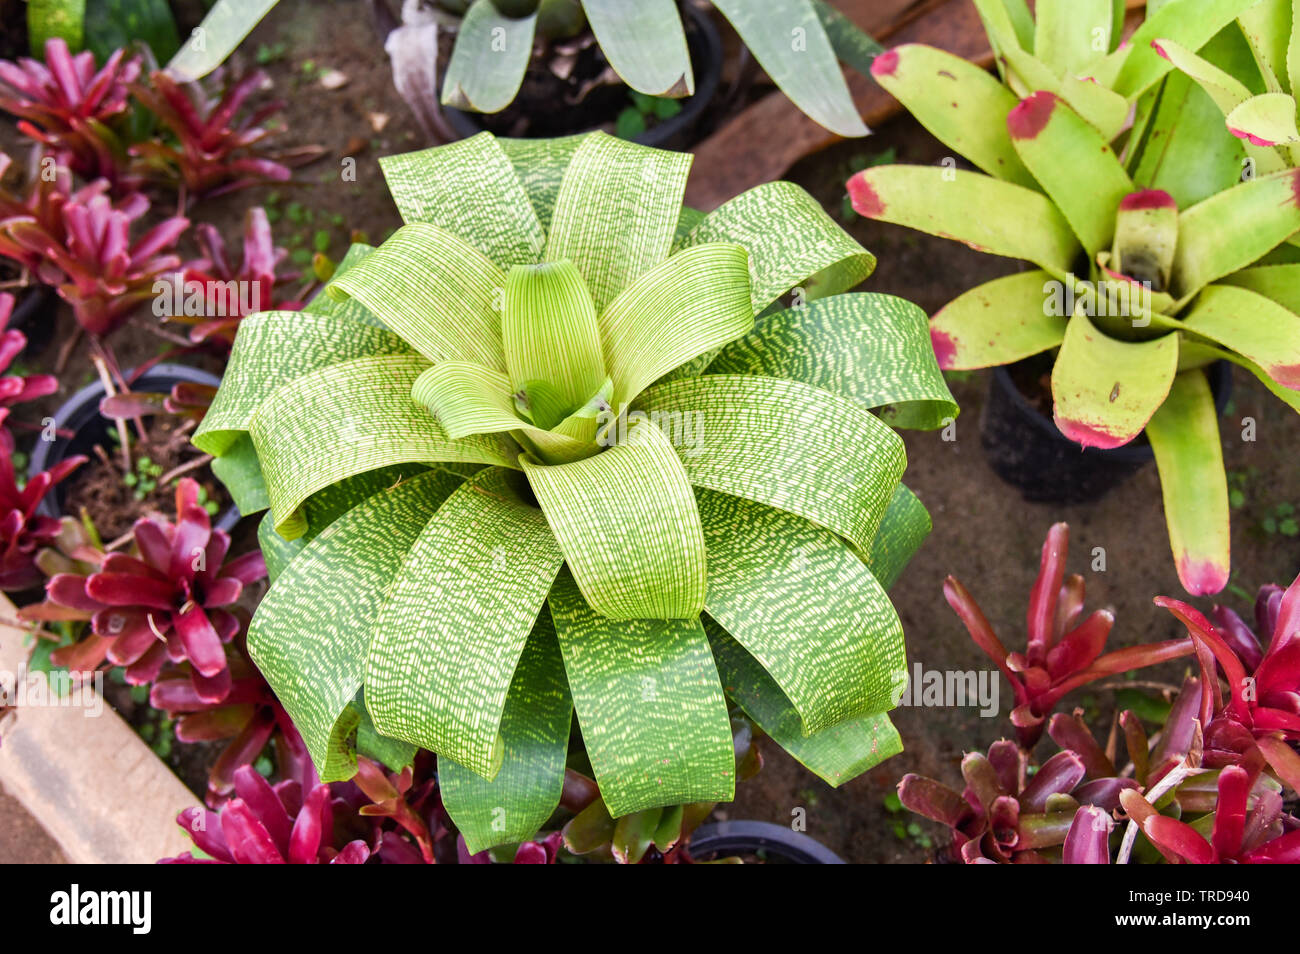 The garden with beautiful green leaves plant of bromeliad flower blooming Stock Photo